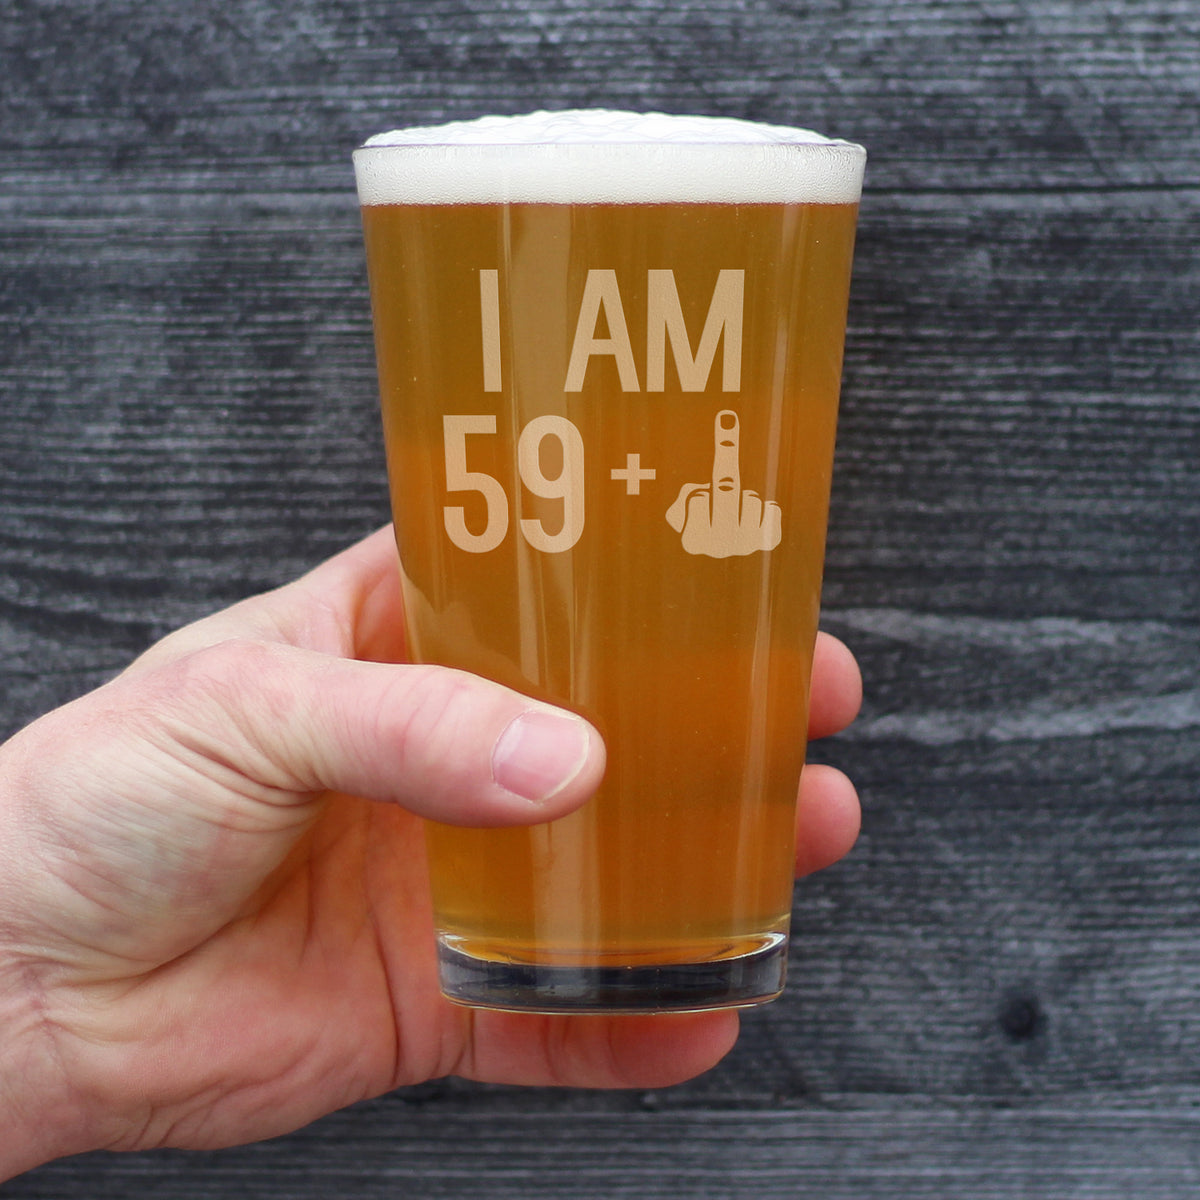 59 + 1 Middle Finger - 16 oz Pint Glass for Beer - Funny 60th Birthday Gifts for Men and Women Turning 60